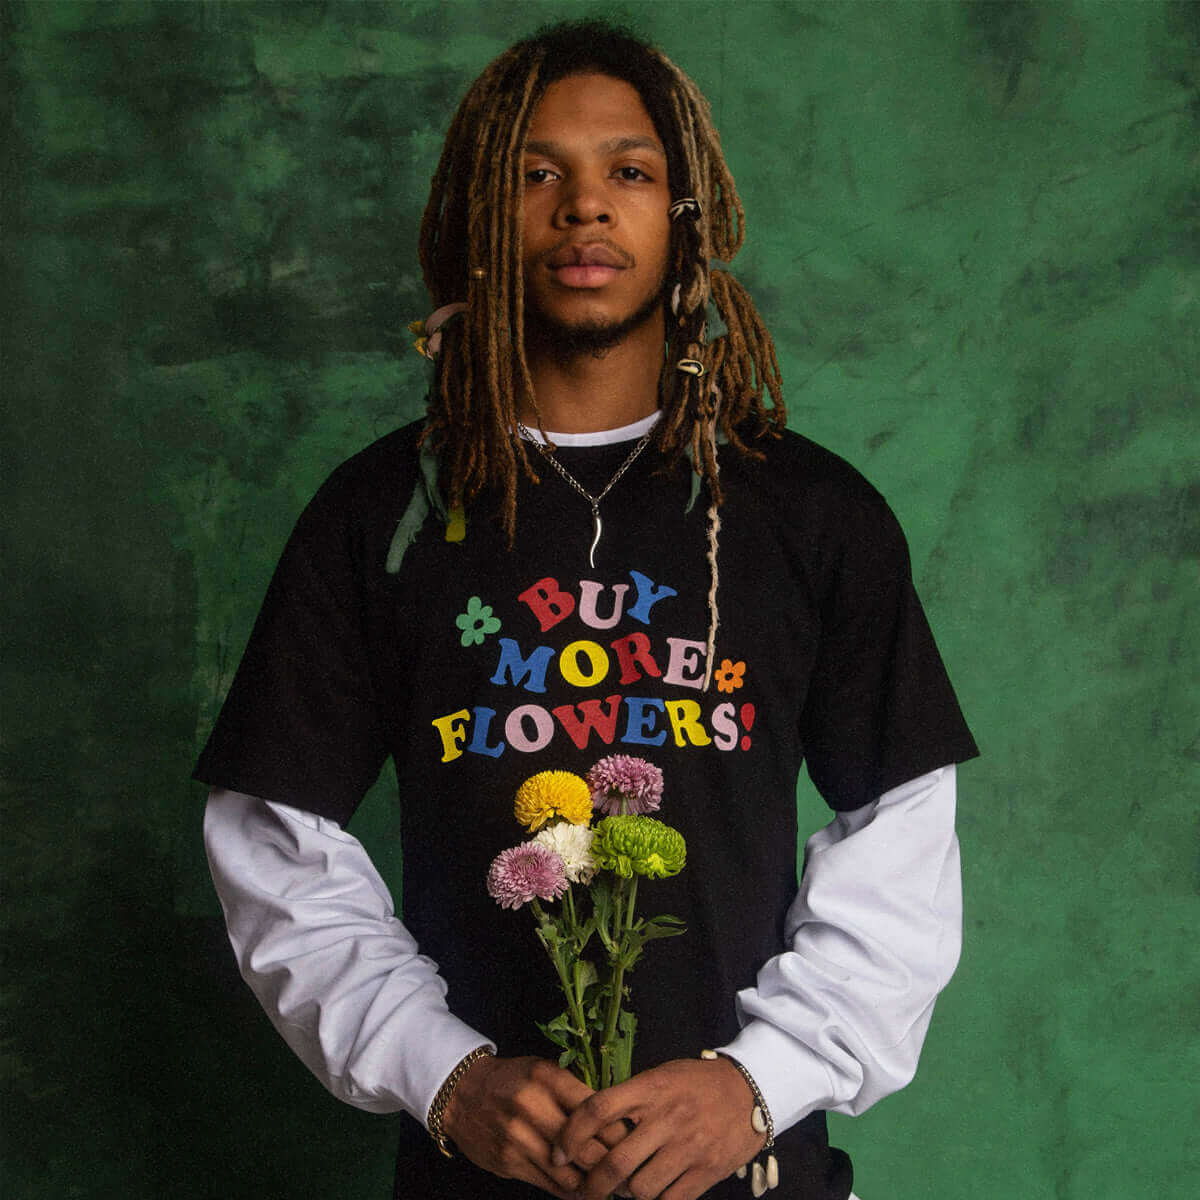 "Buy More Flowers!" Shirts by Steven Othello